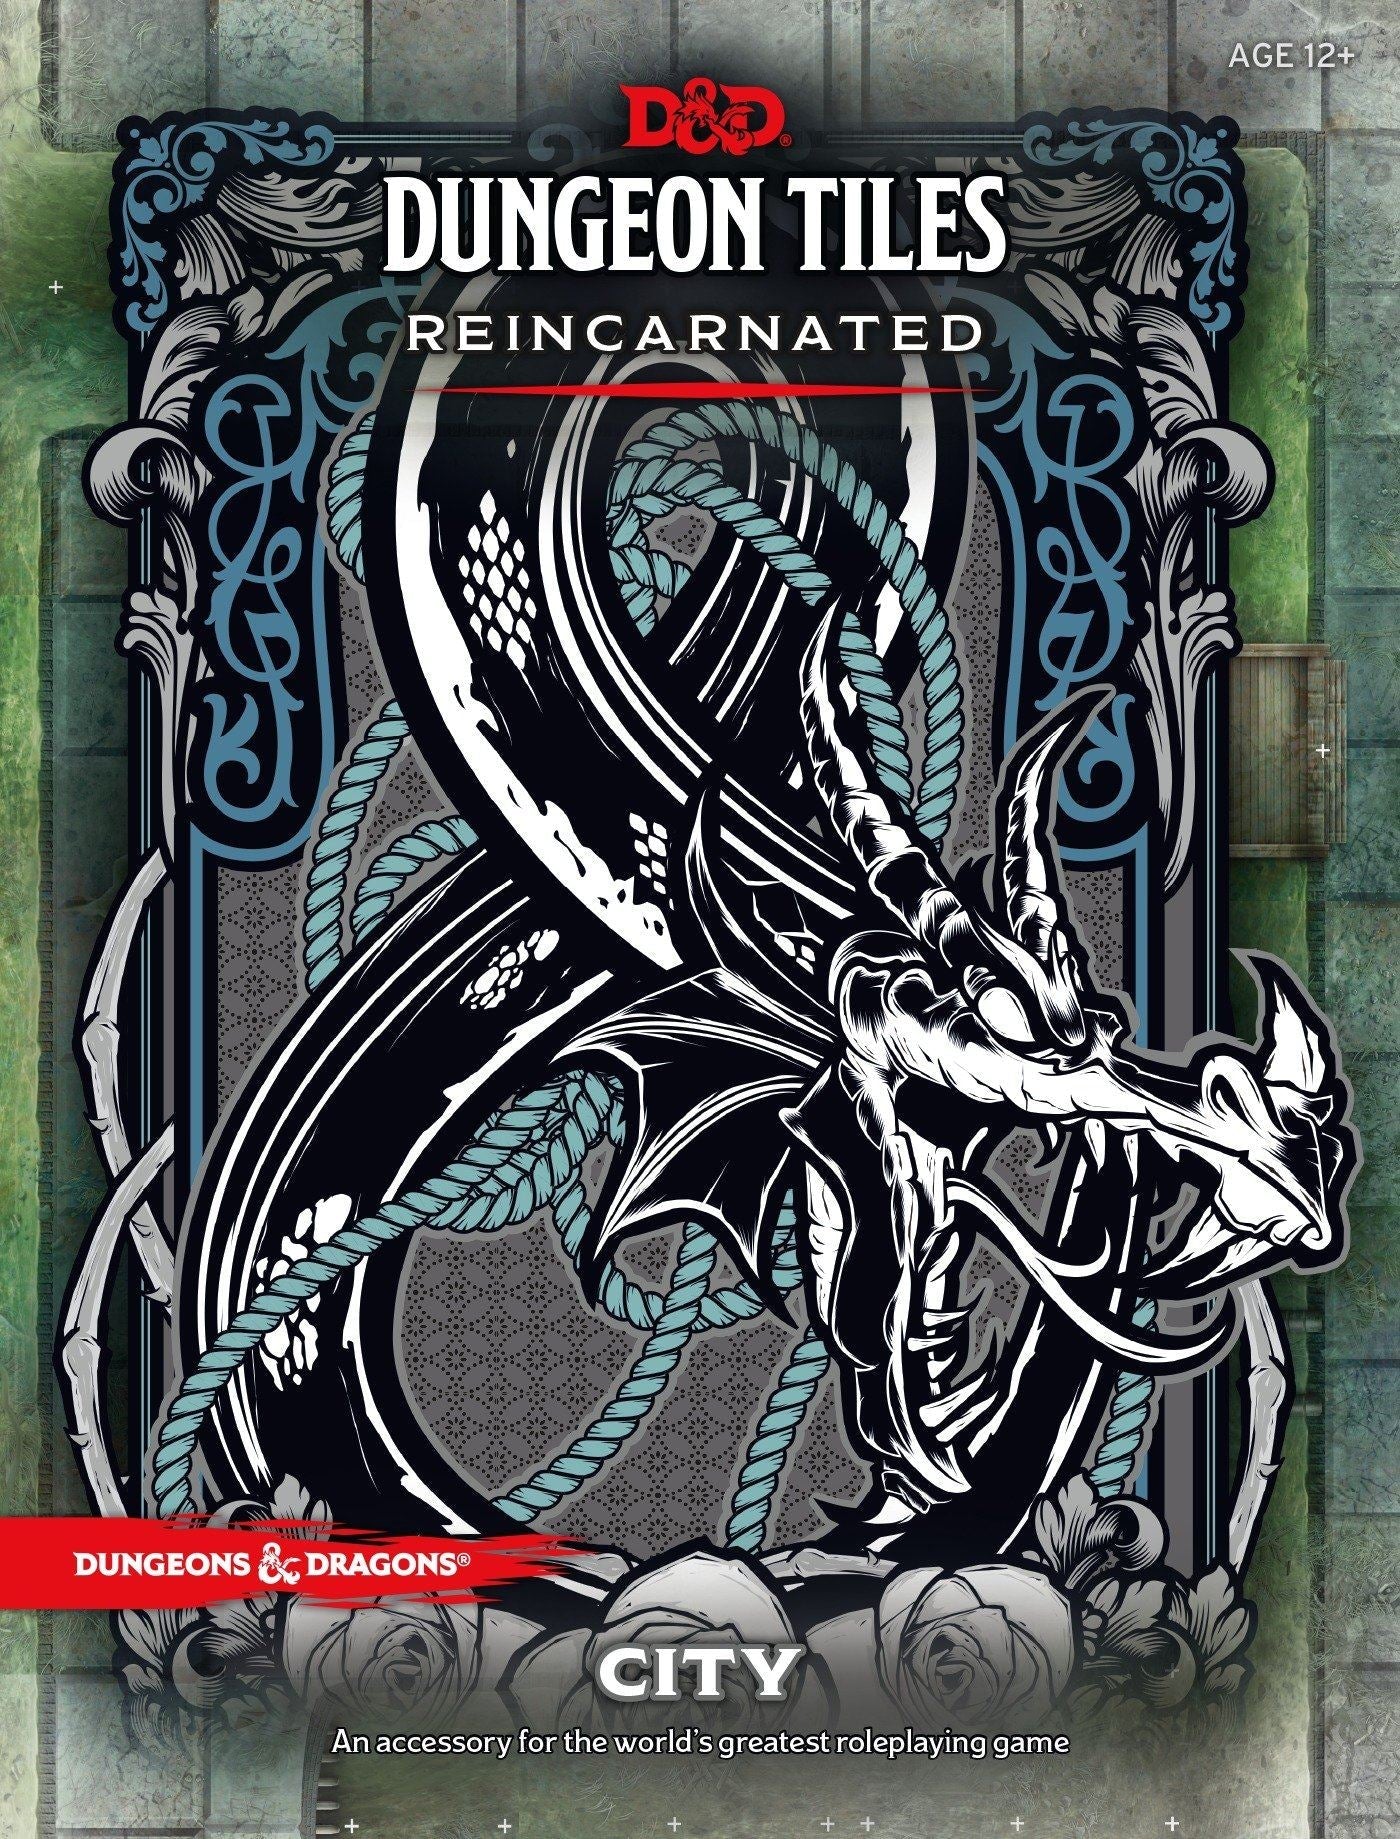 Dungeon Tiles Reincarnated - Bards & Cards